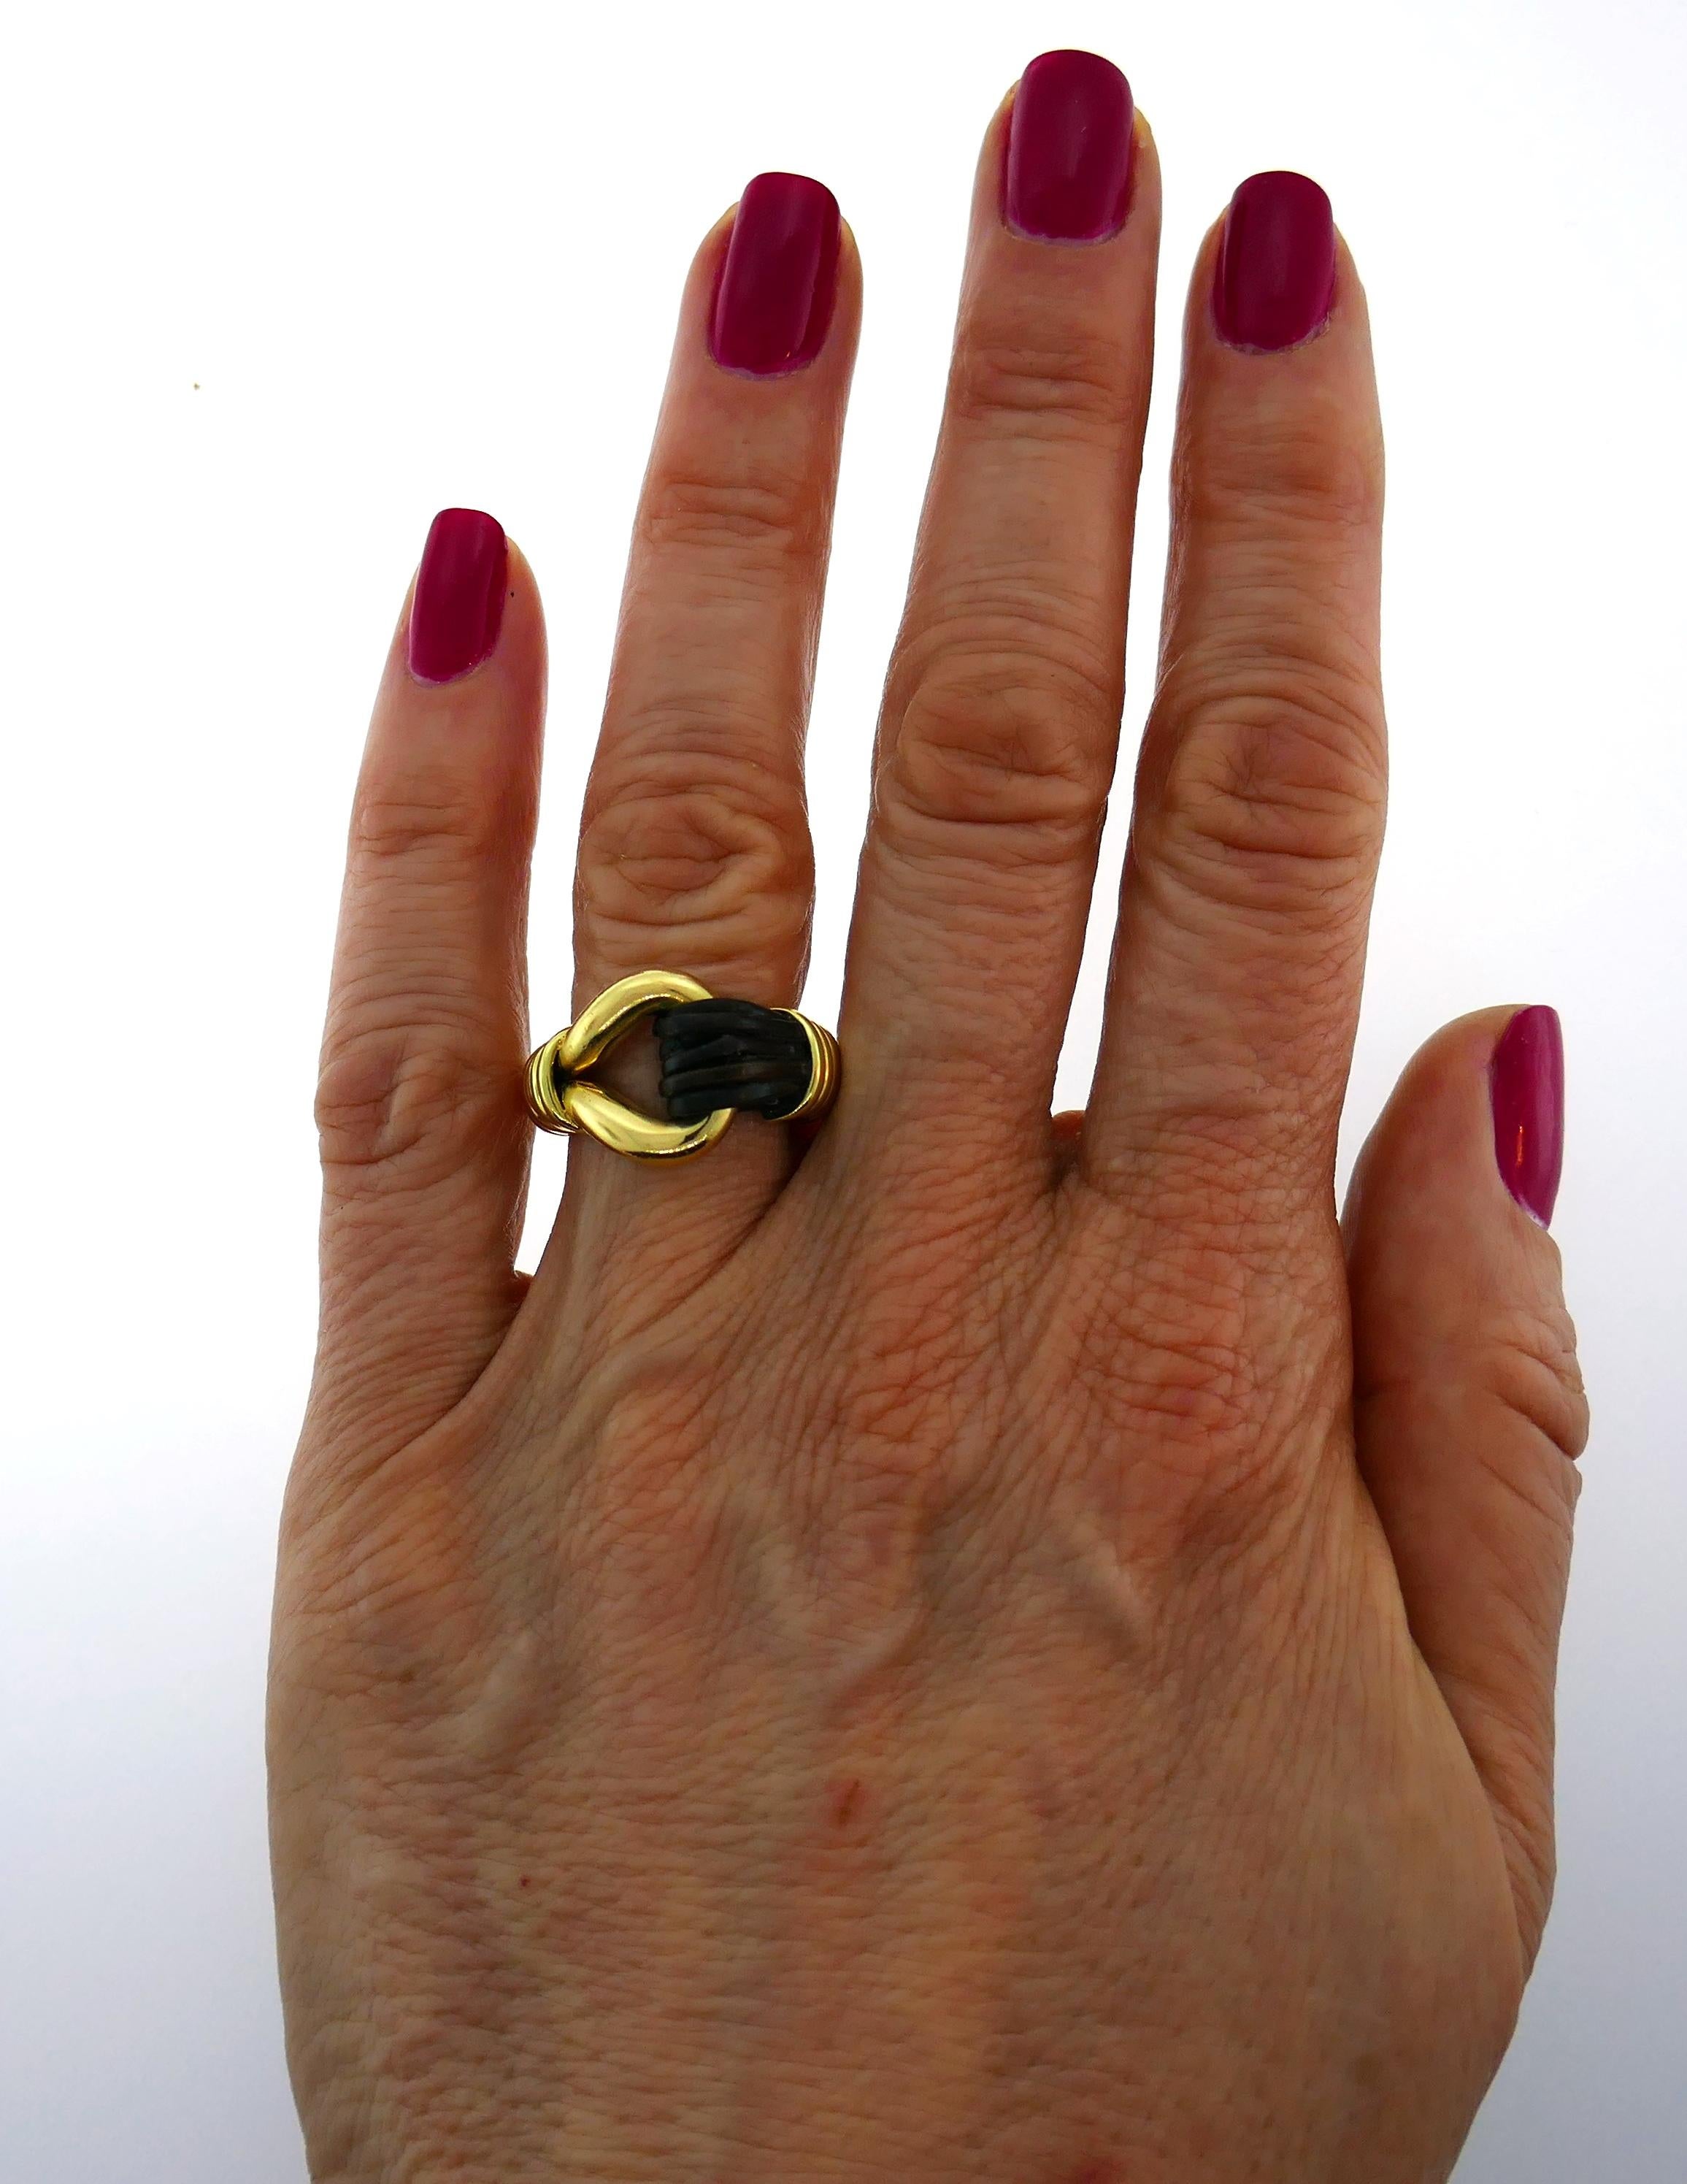 Elegant and understated cocktail ring created by Van Cleef & Arpels in the 1970s. 
Made of 18k yellow gold. Size 6. 
Top part of the ring measures 3/4 x 1/2 inch (1.8 x 1.4 cm). Weight 13.3 grams.
Stamped with Van Cleef & Arpels maker's mark, a